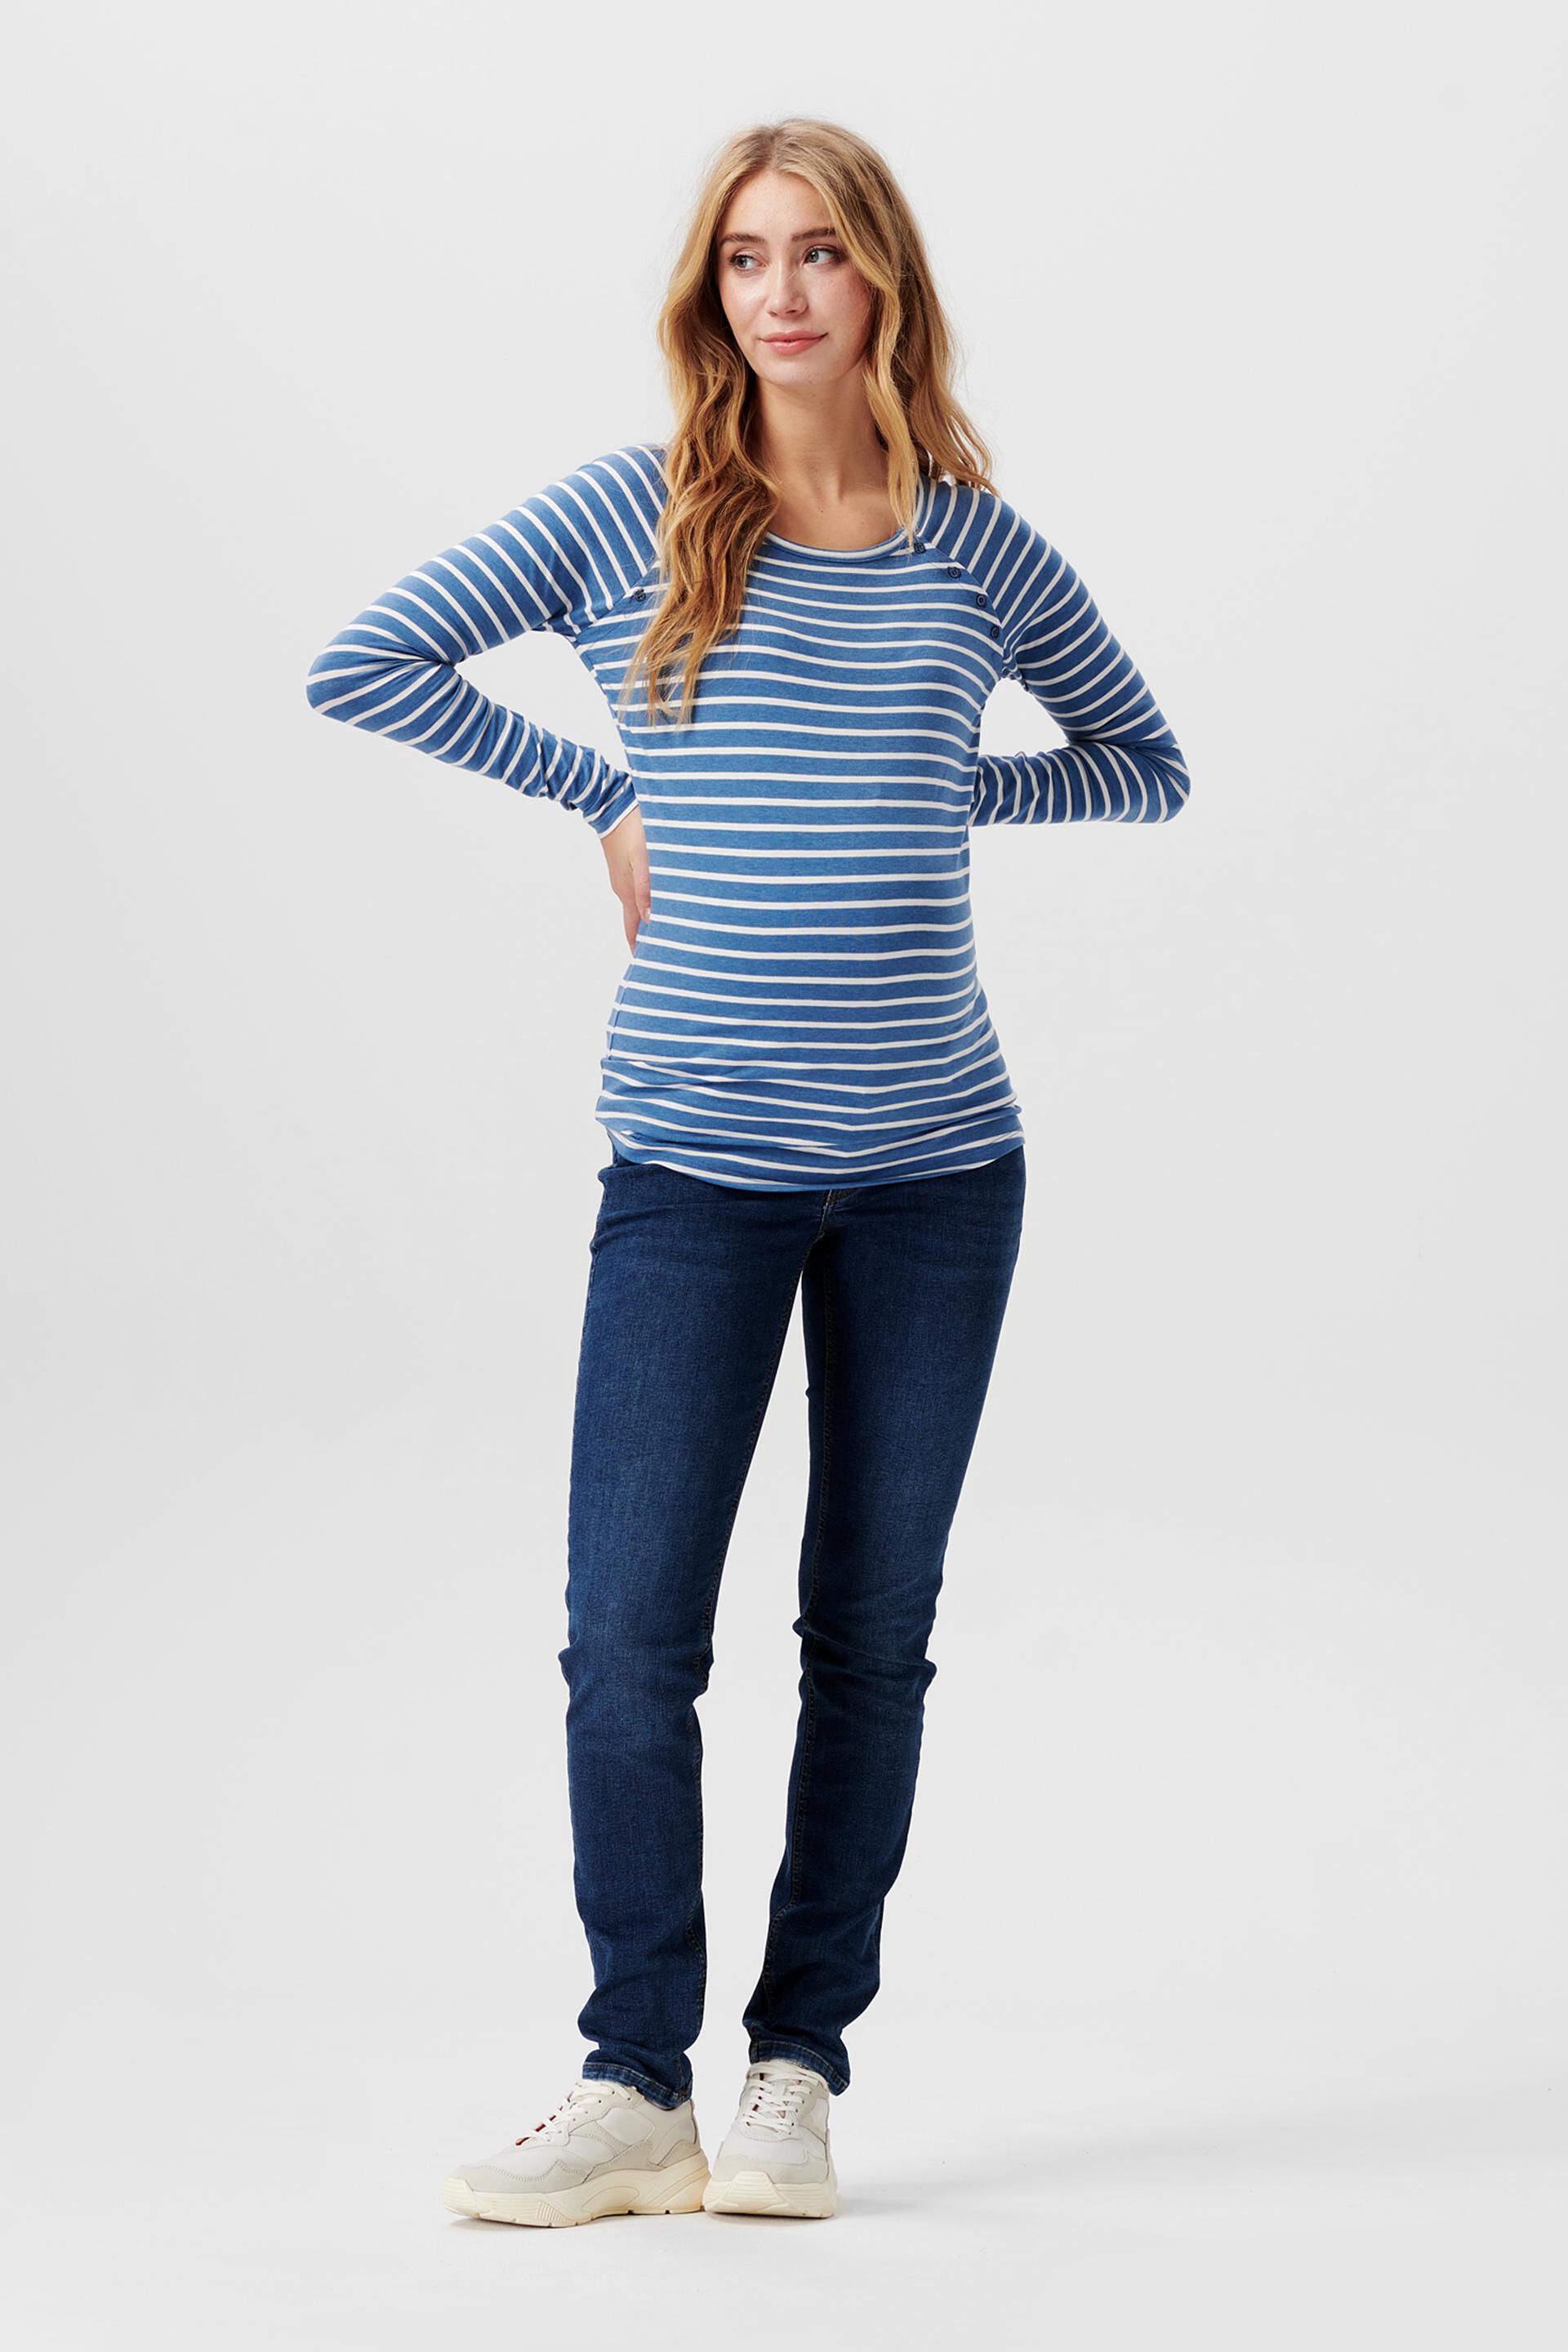 Esprit Striped cotton top, organic long-sleeved